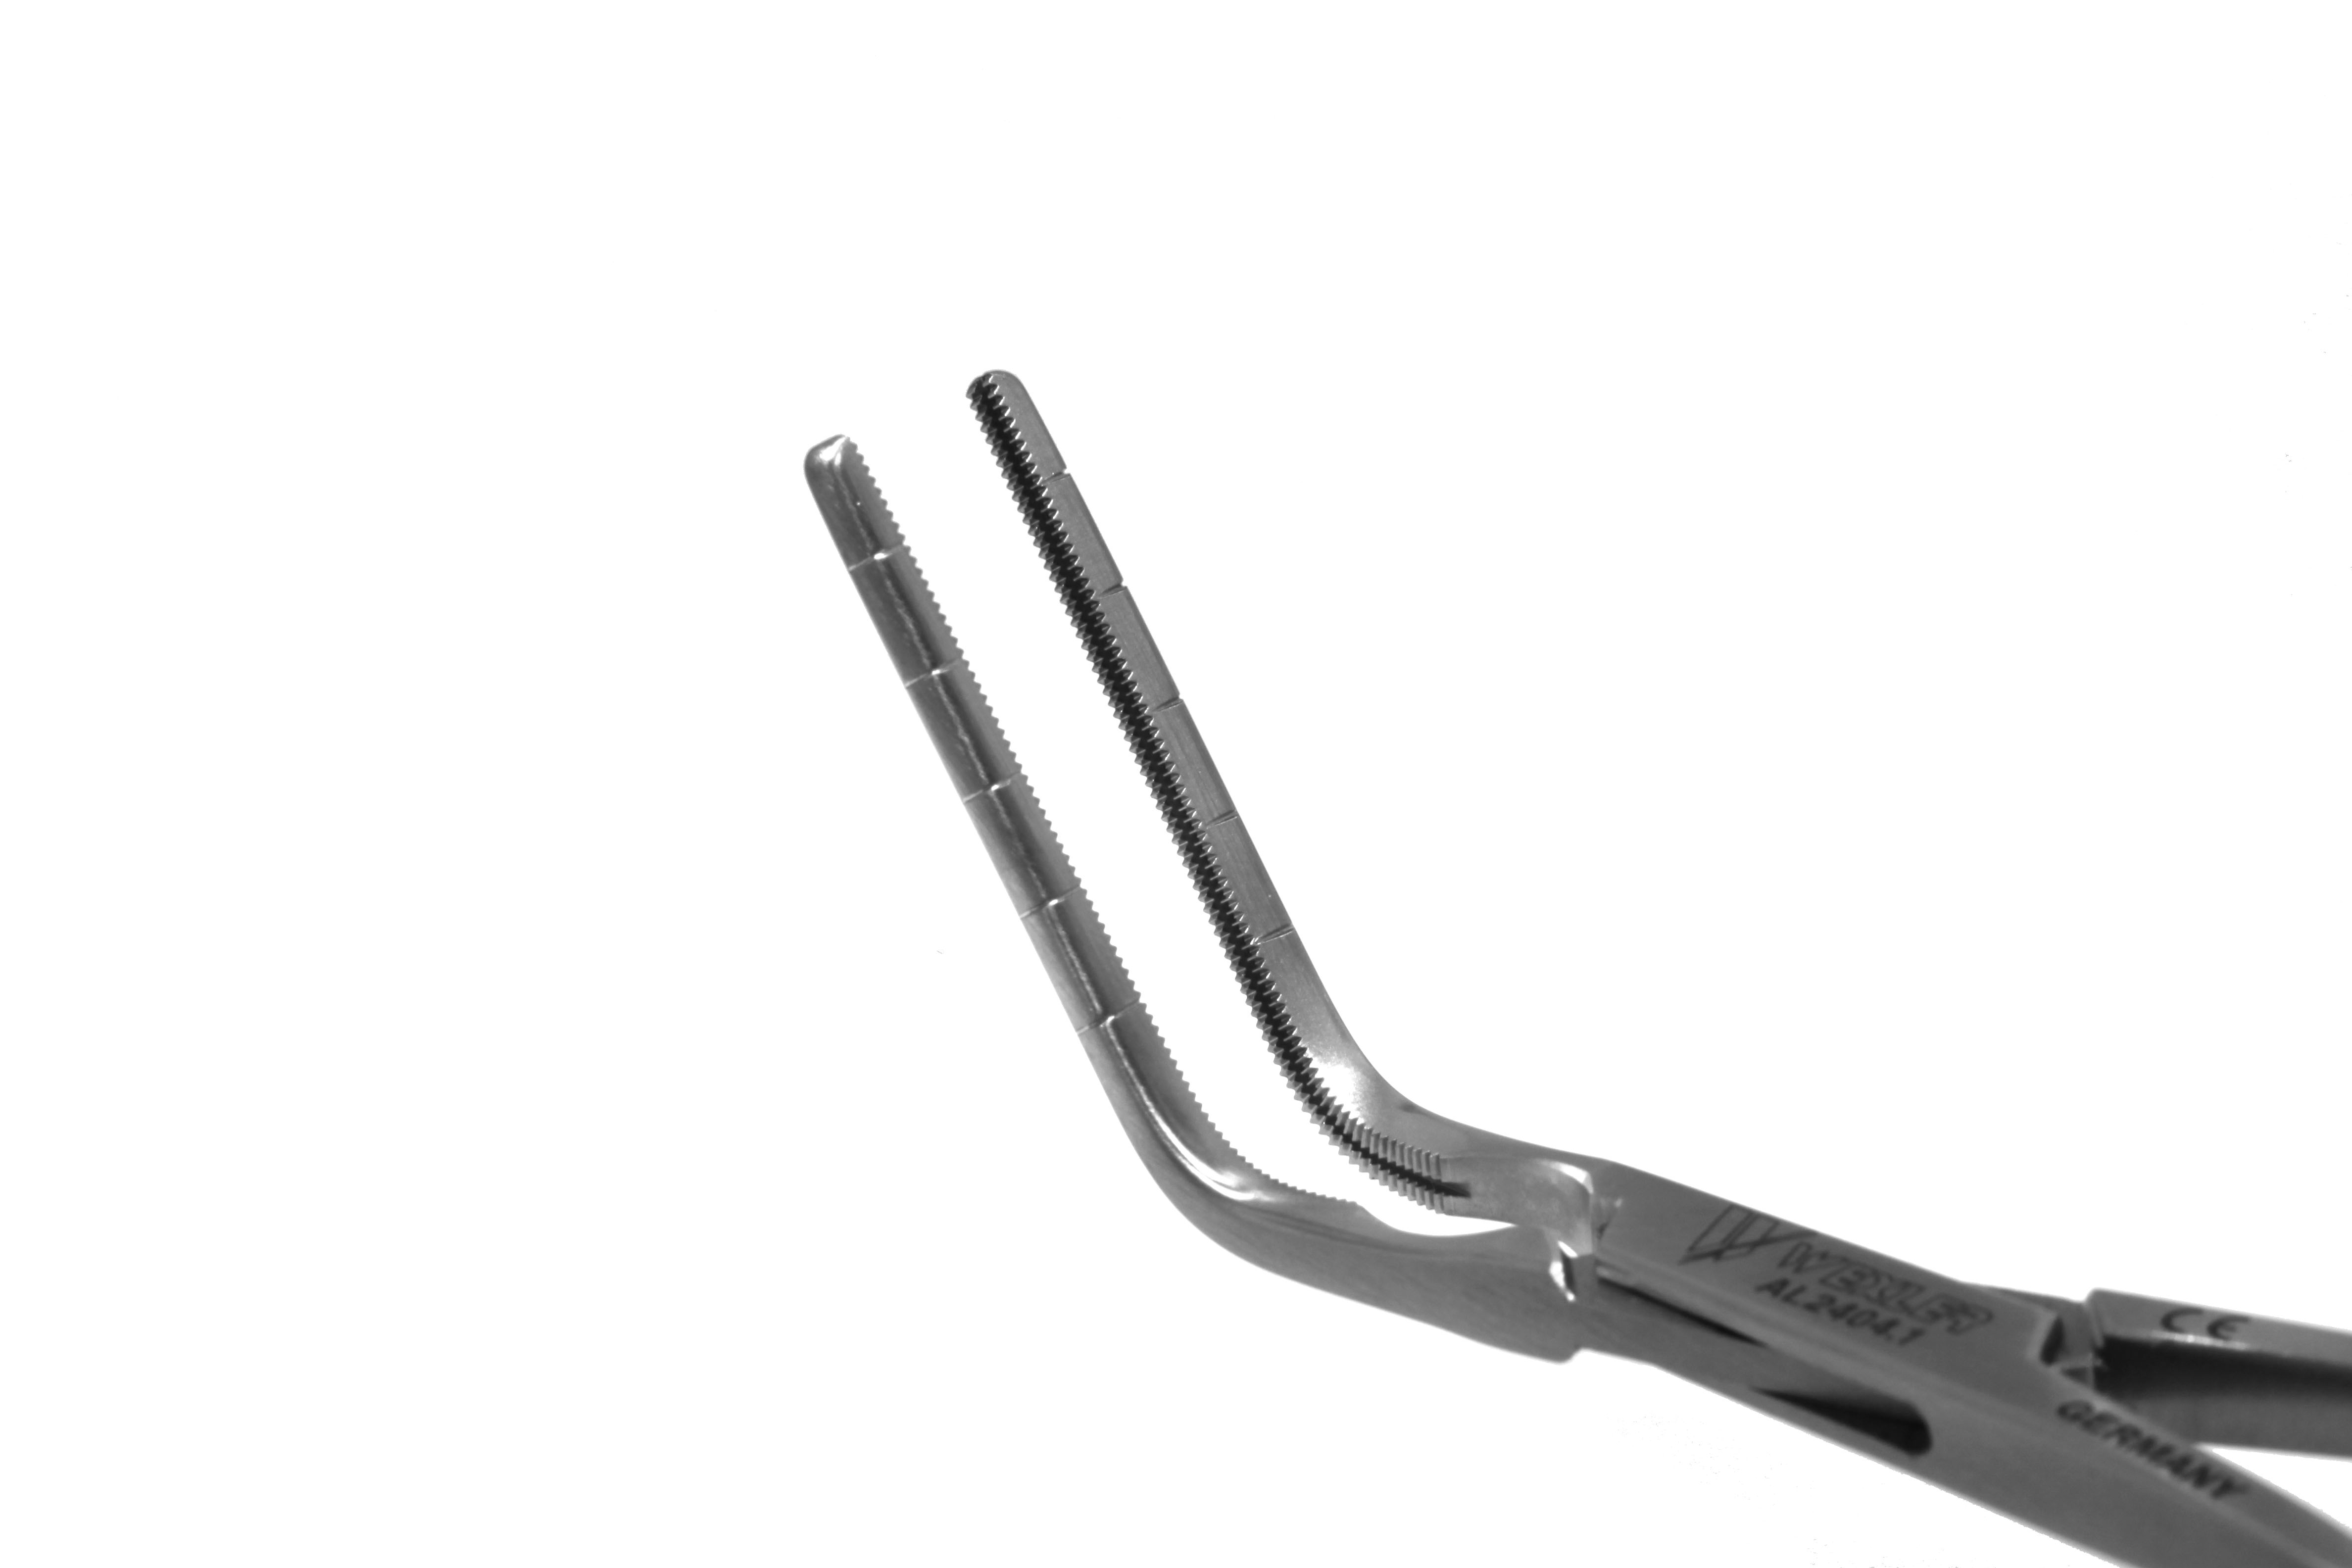 Wexler Multi-Purpose Clamp - Angled 30mm long Cooley Atraumatic jaws